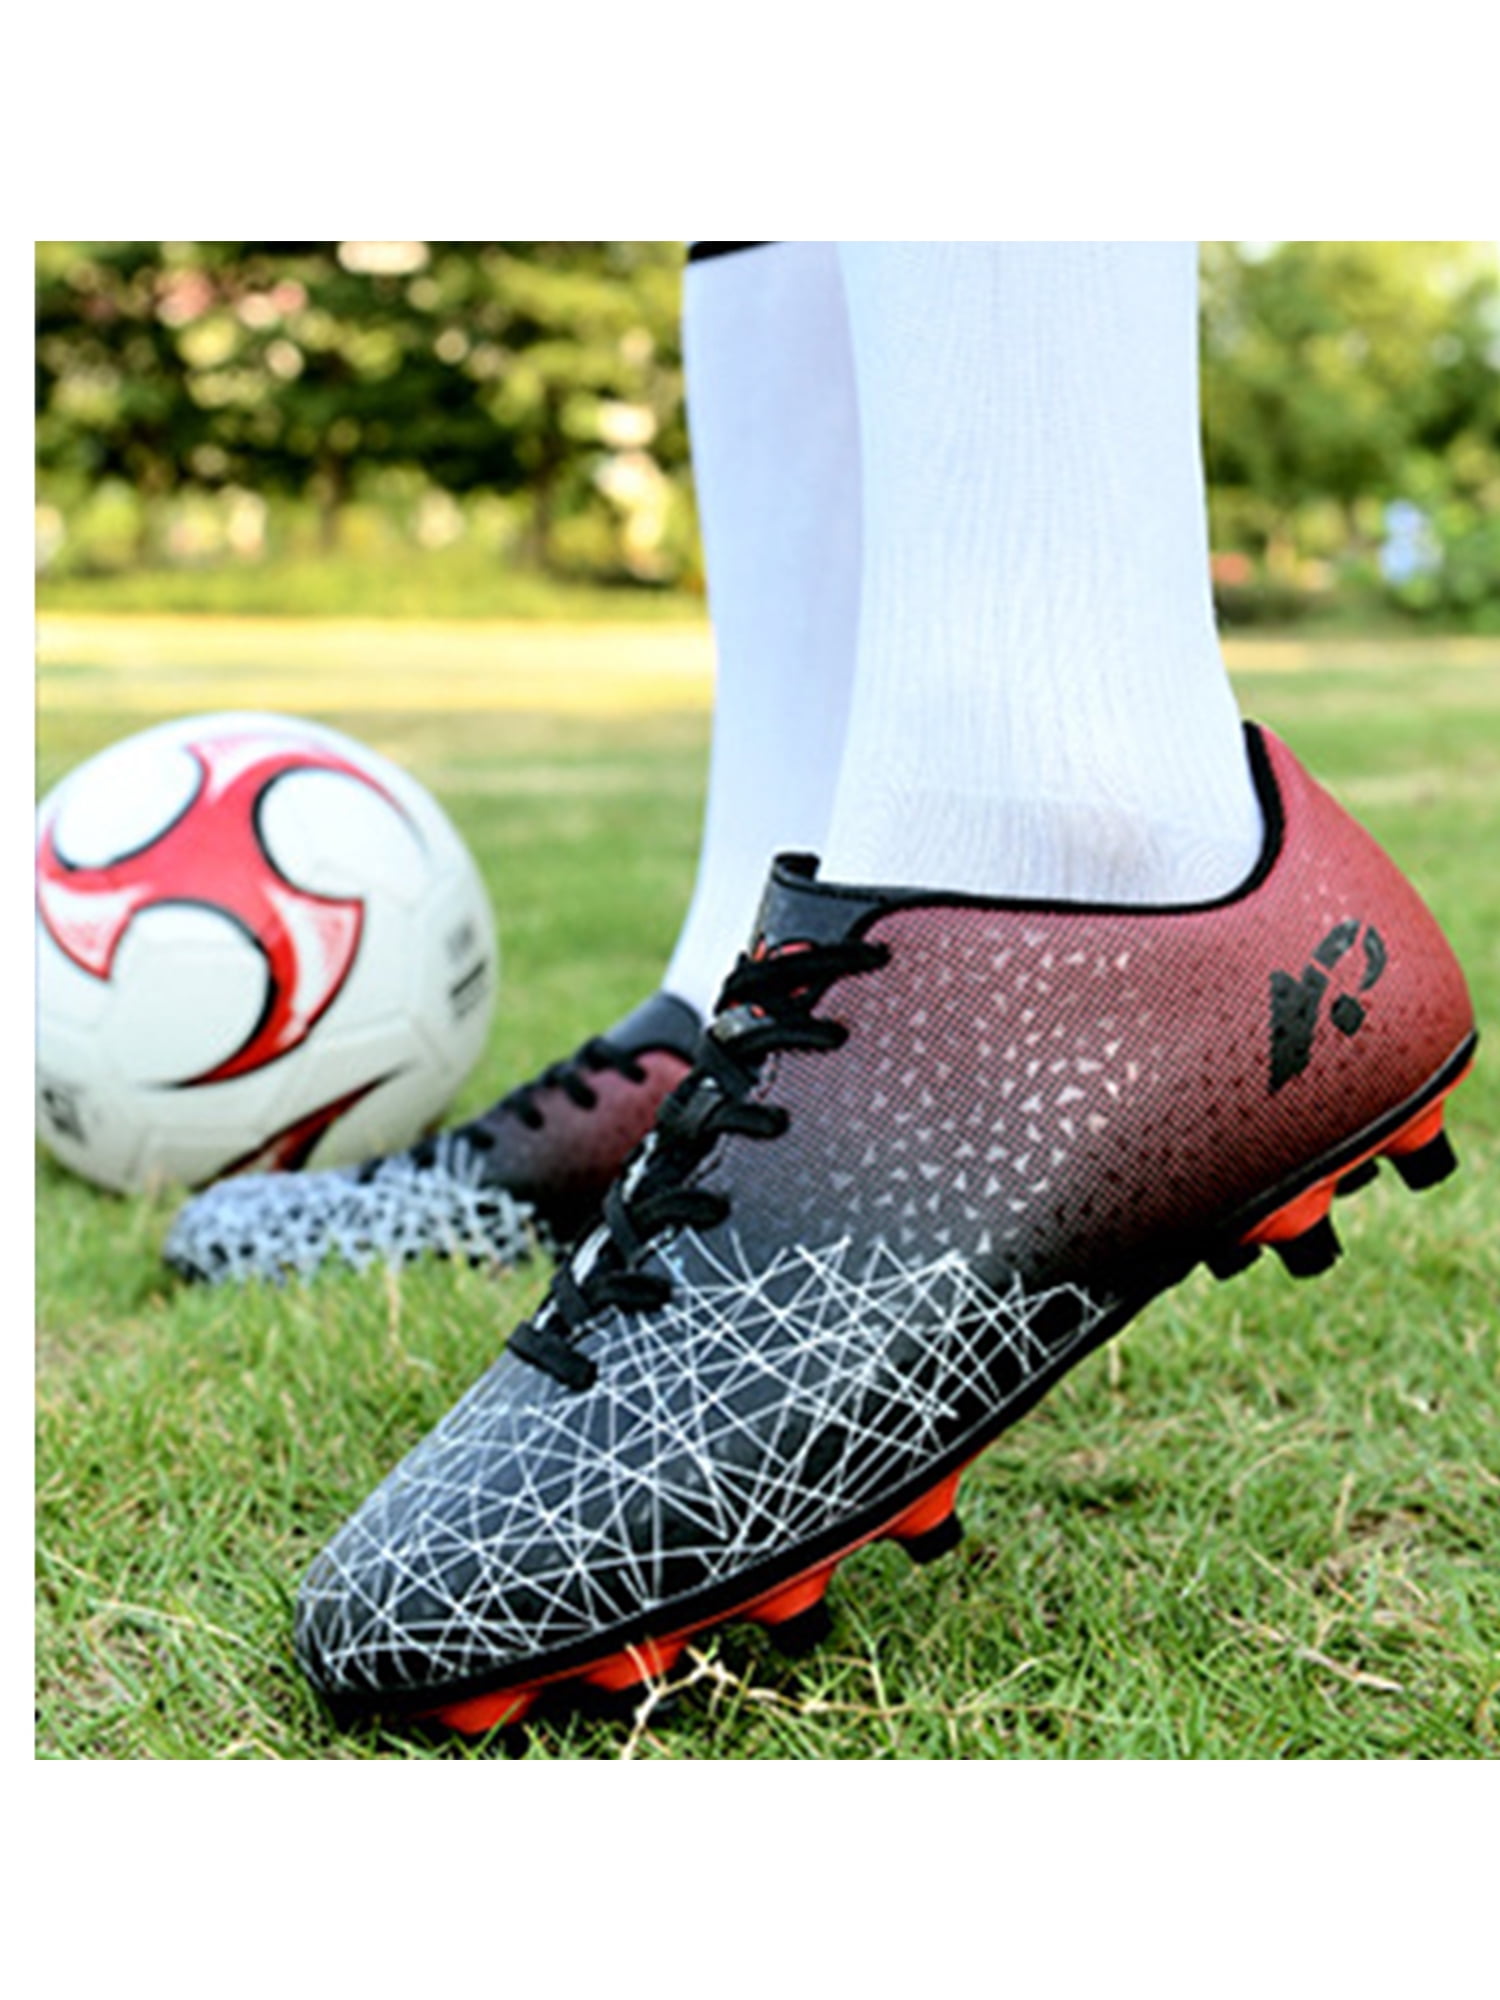 Mens Kids Boys Teens Outdoor Sports FG Moulded Studs Soccer Shoes Football Shoes 